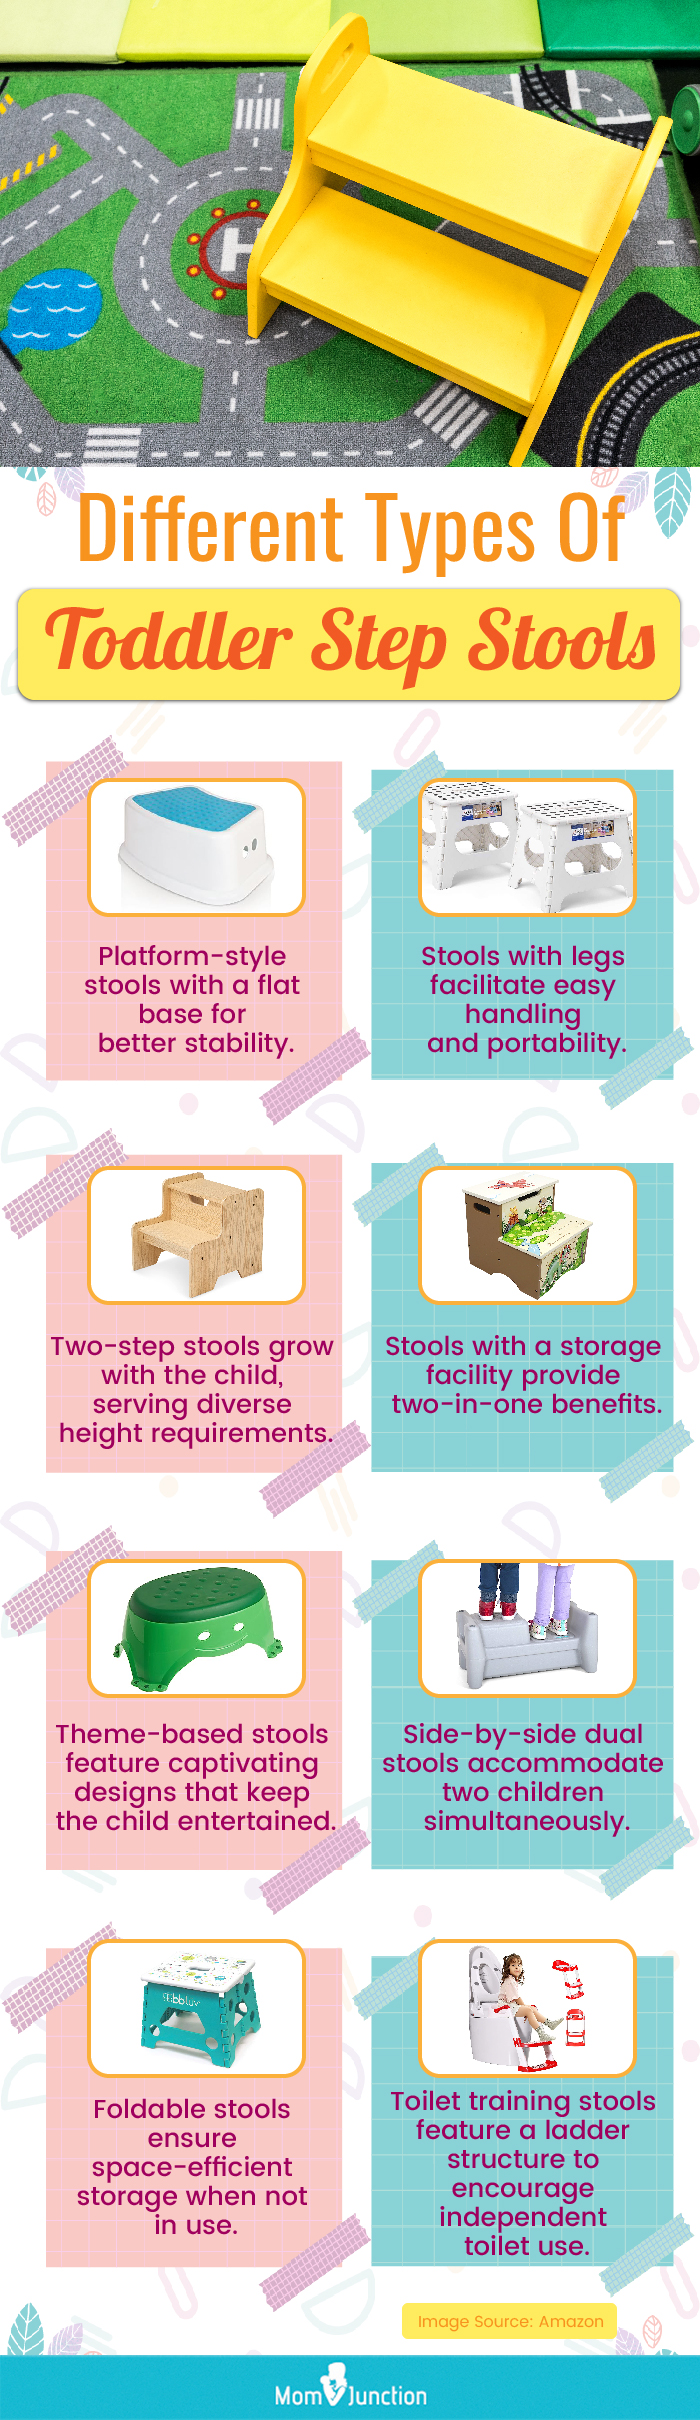 Different Types Of Toddler Step Stools (infographic)